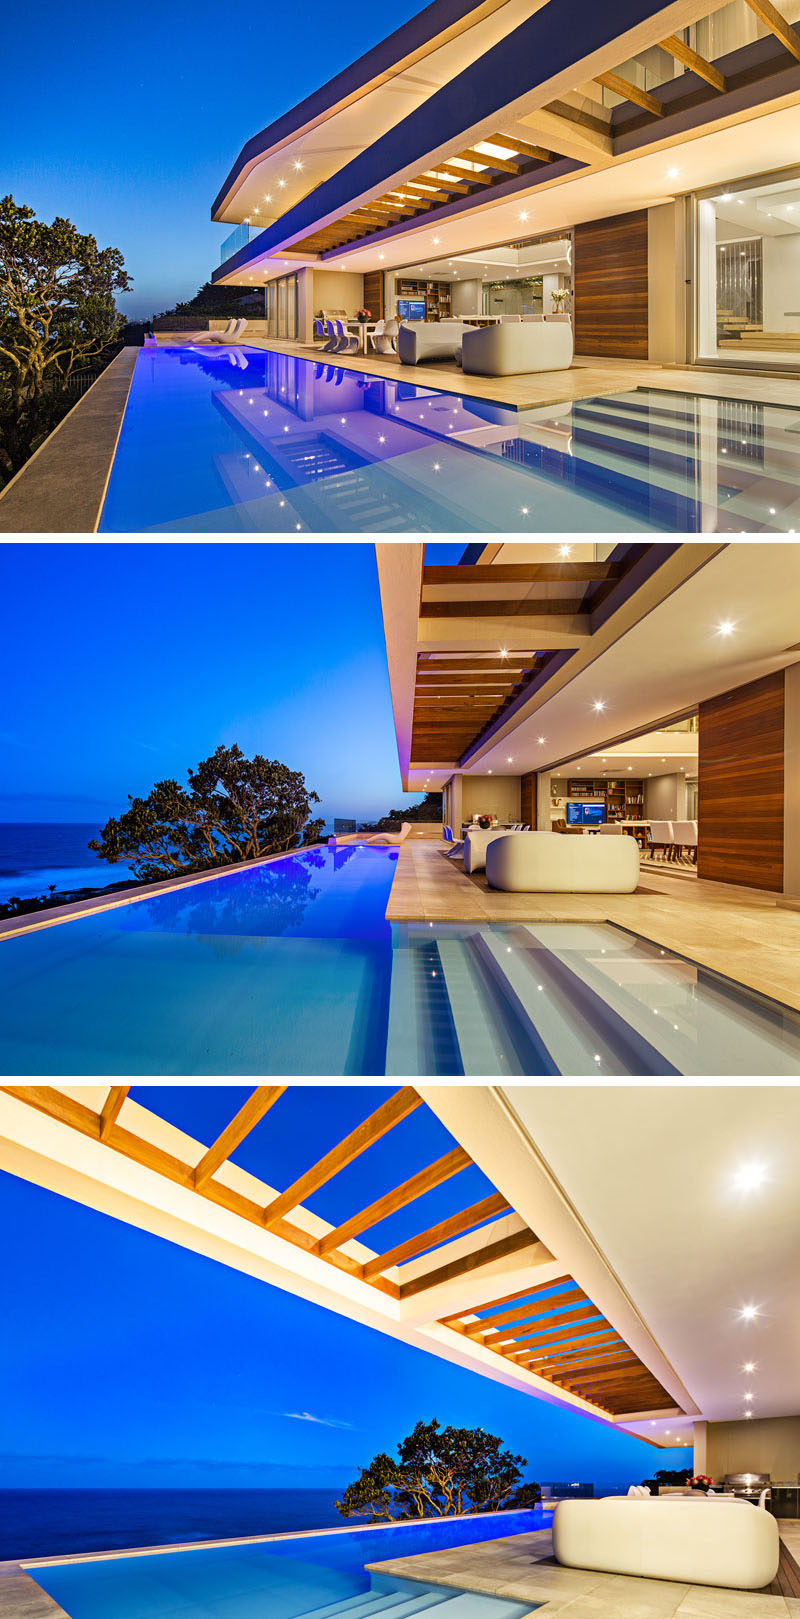 This pool runs the length of the home and provides sea views.